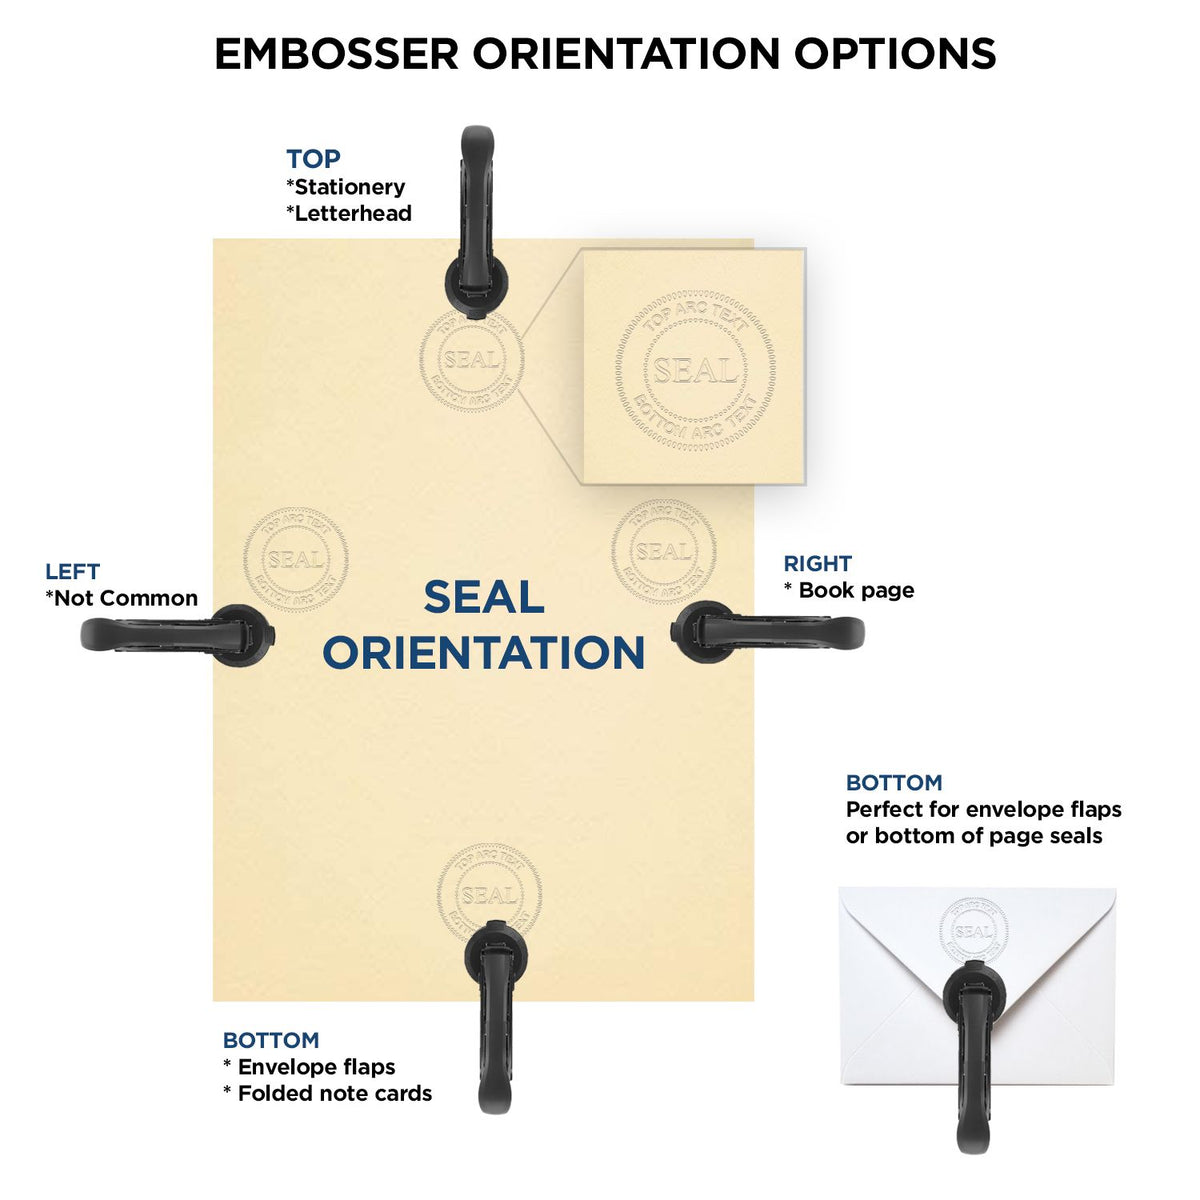 An infographic for the Handheld Texas Professional Geologist Embosser showing embosser orientation, this is showing examples of a top, bottom, right and left insert.